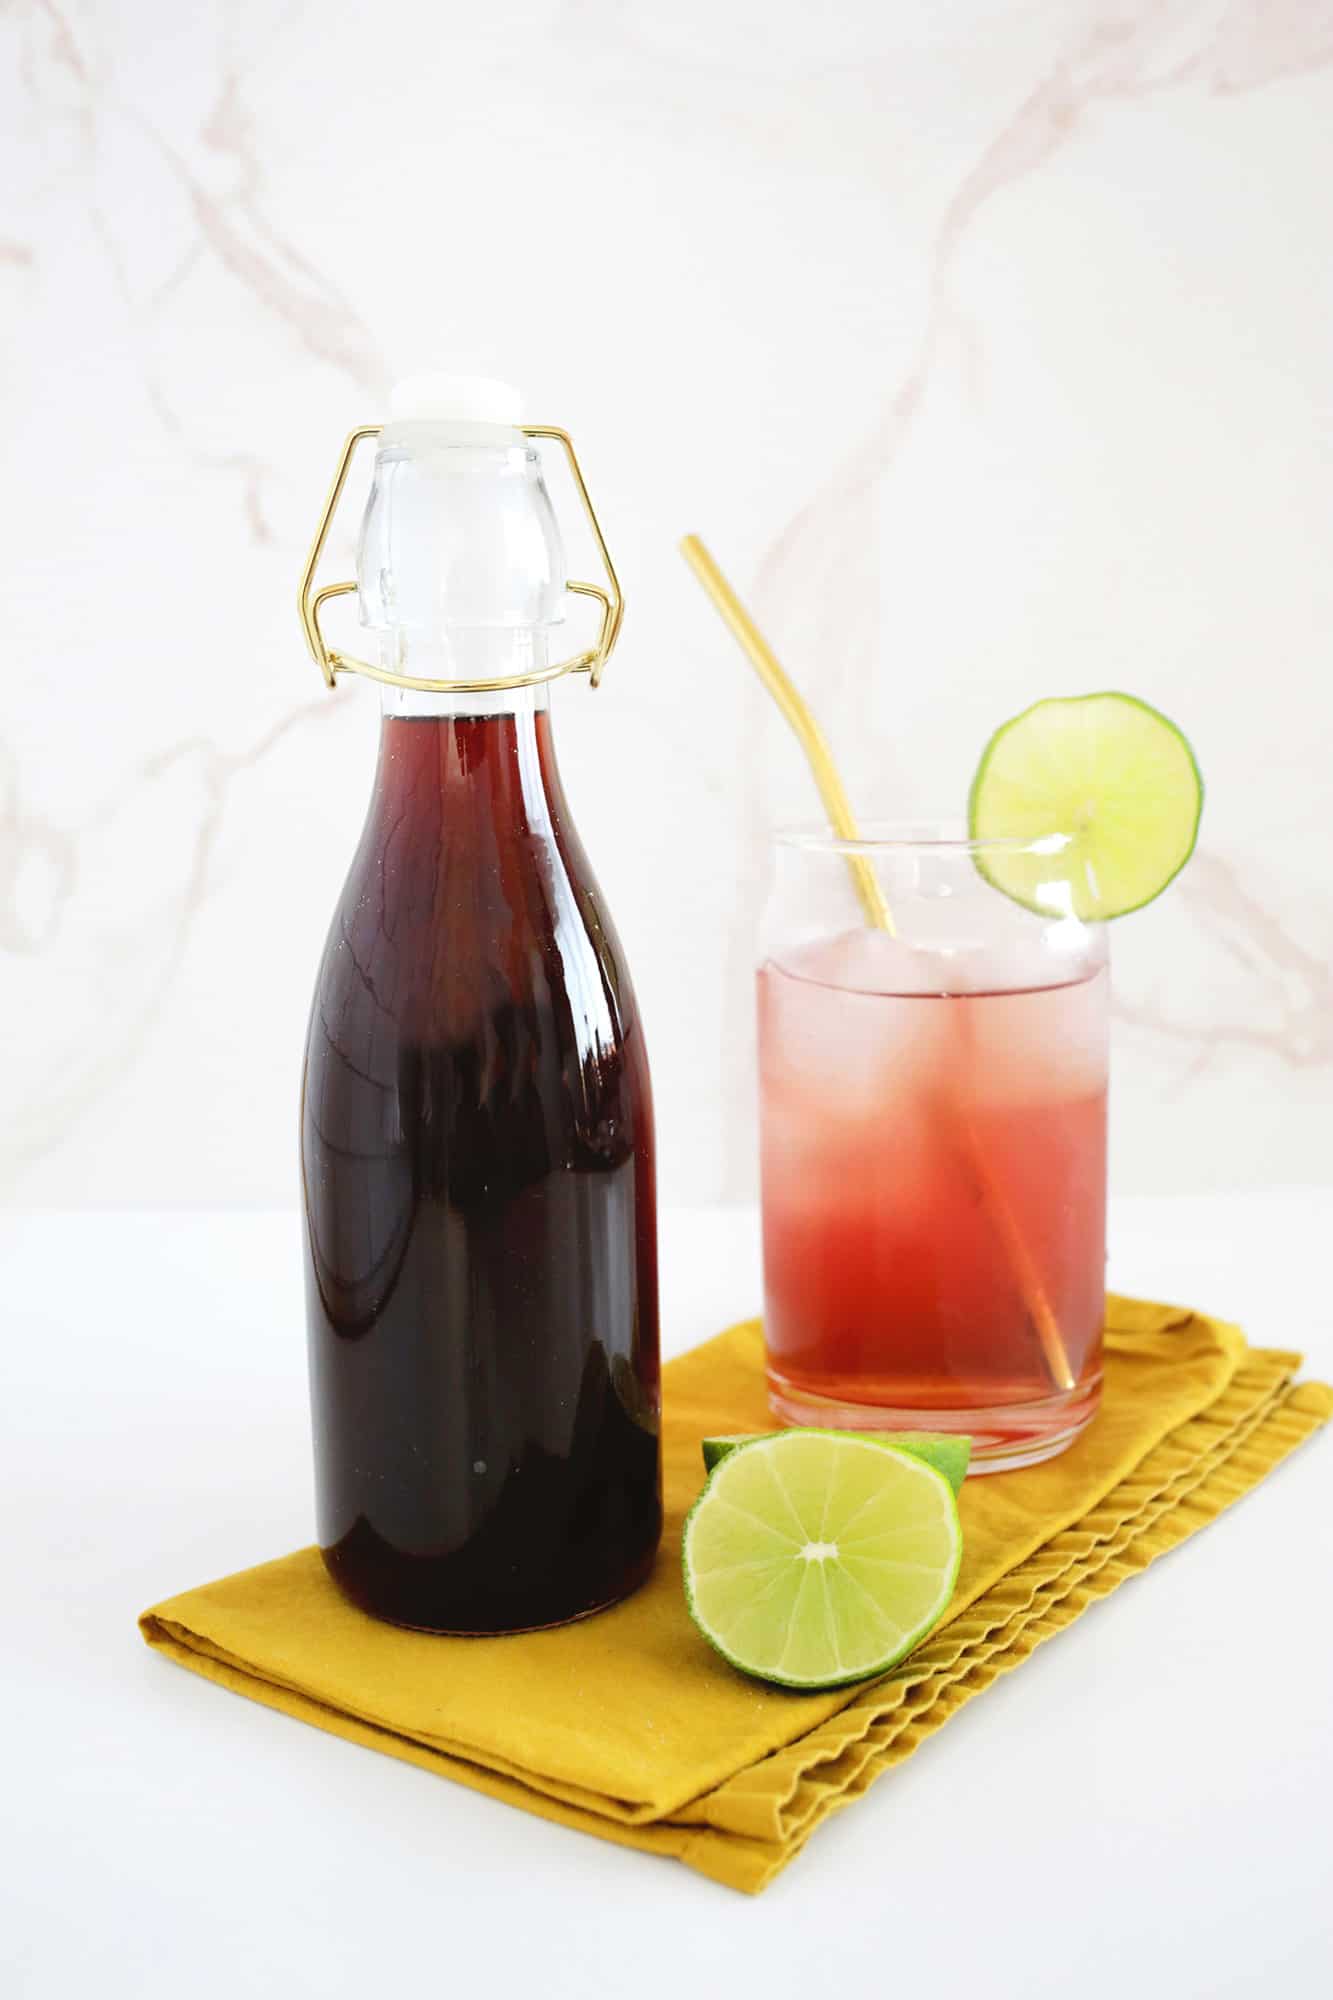 Bottle of homemade grenadine next to a cocktail